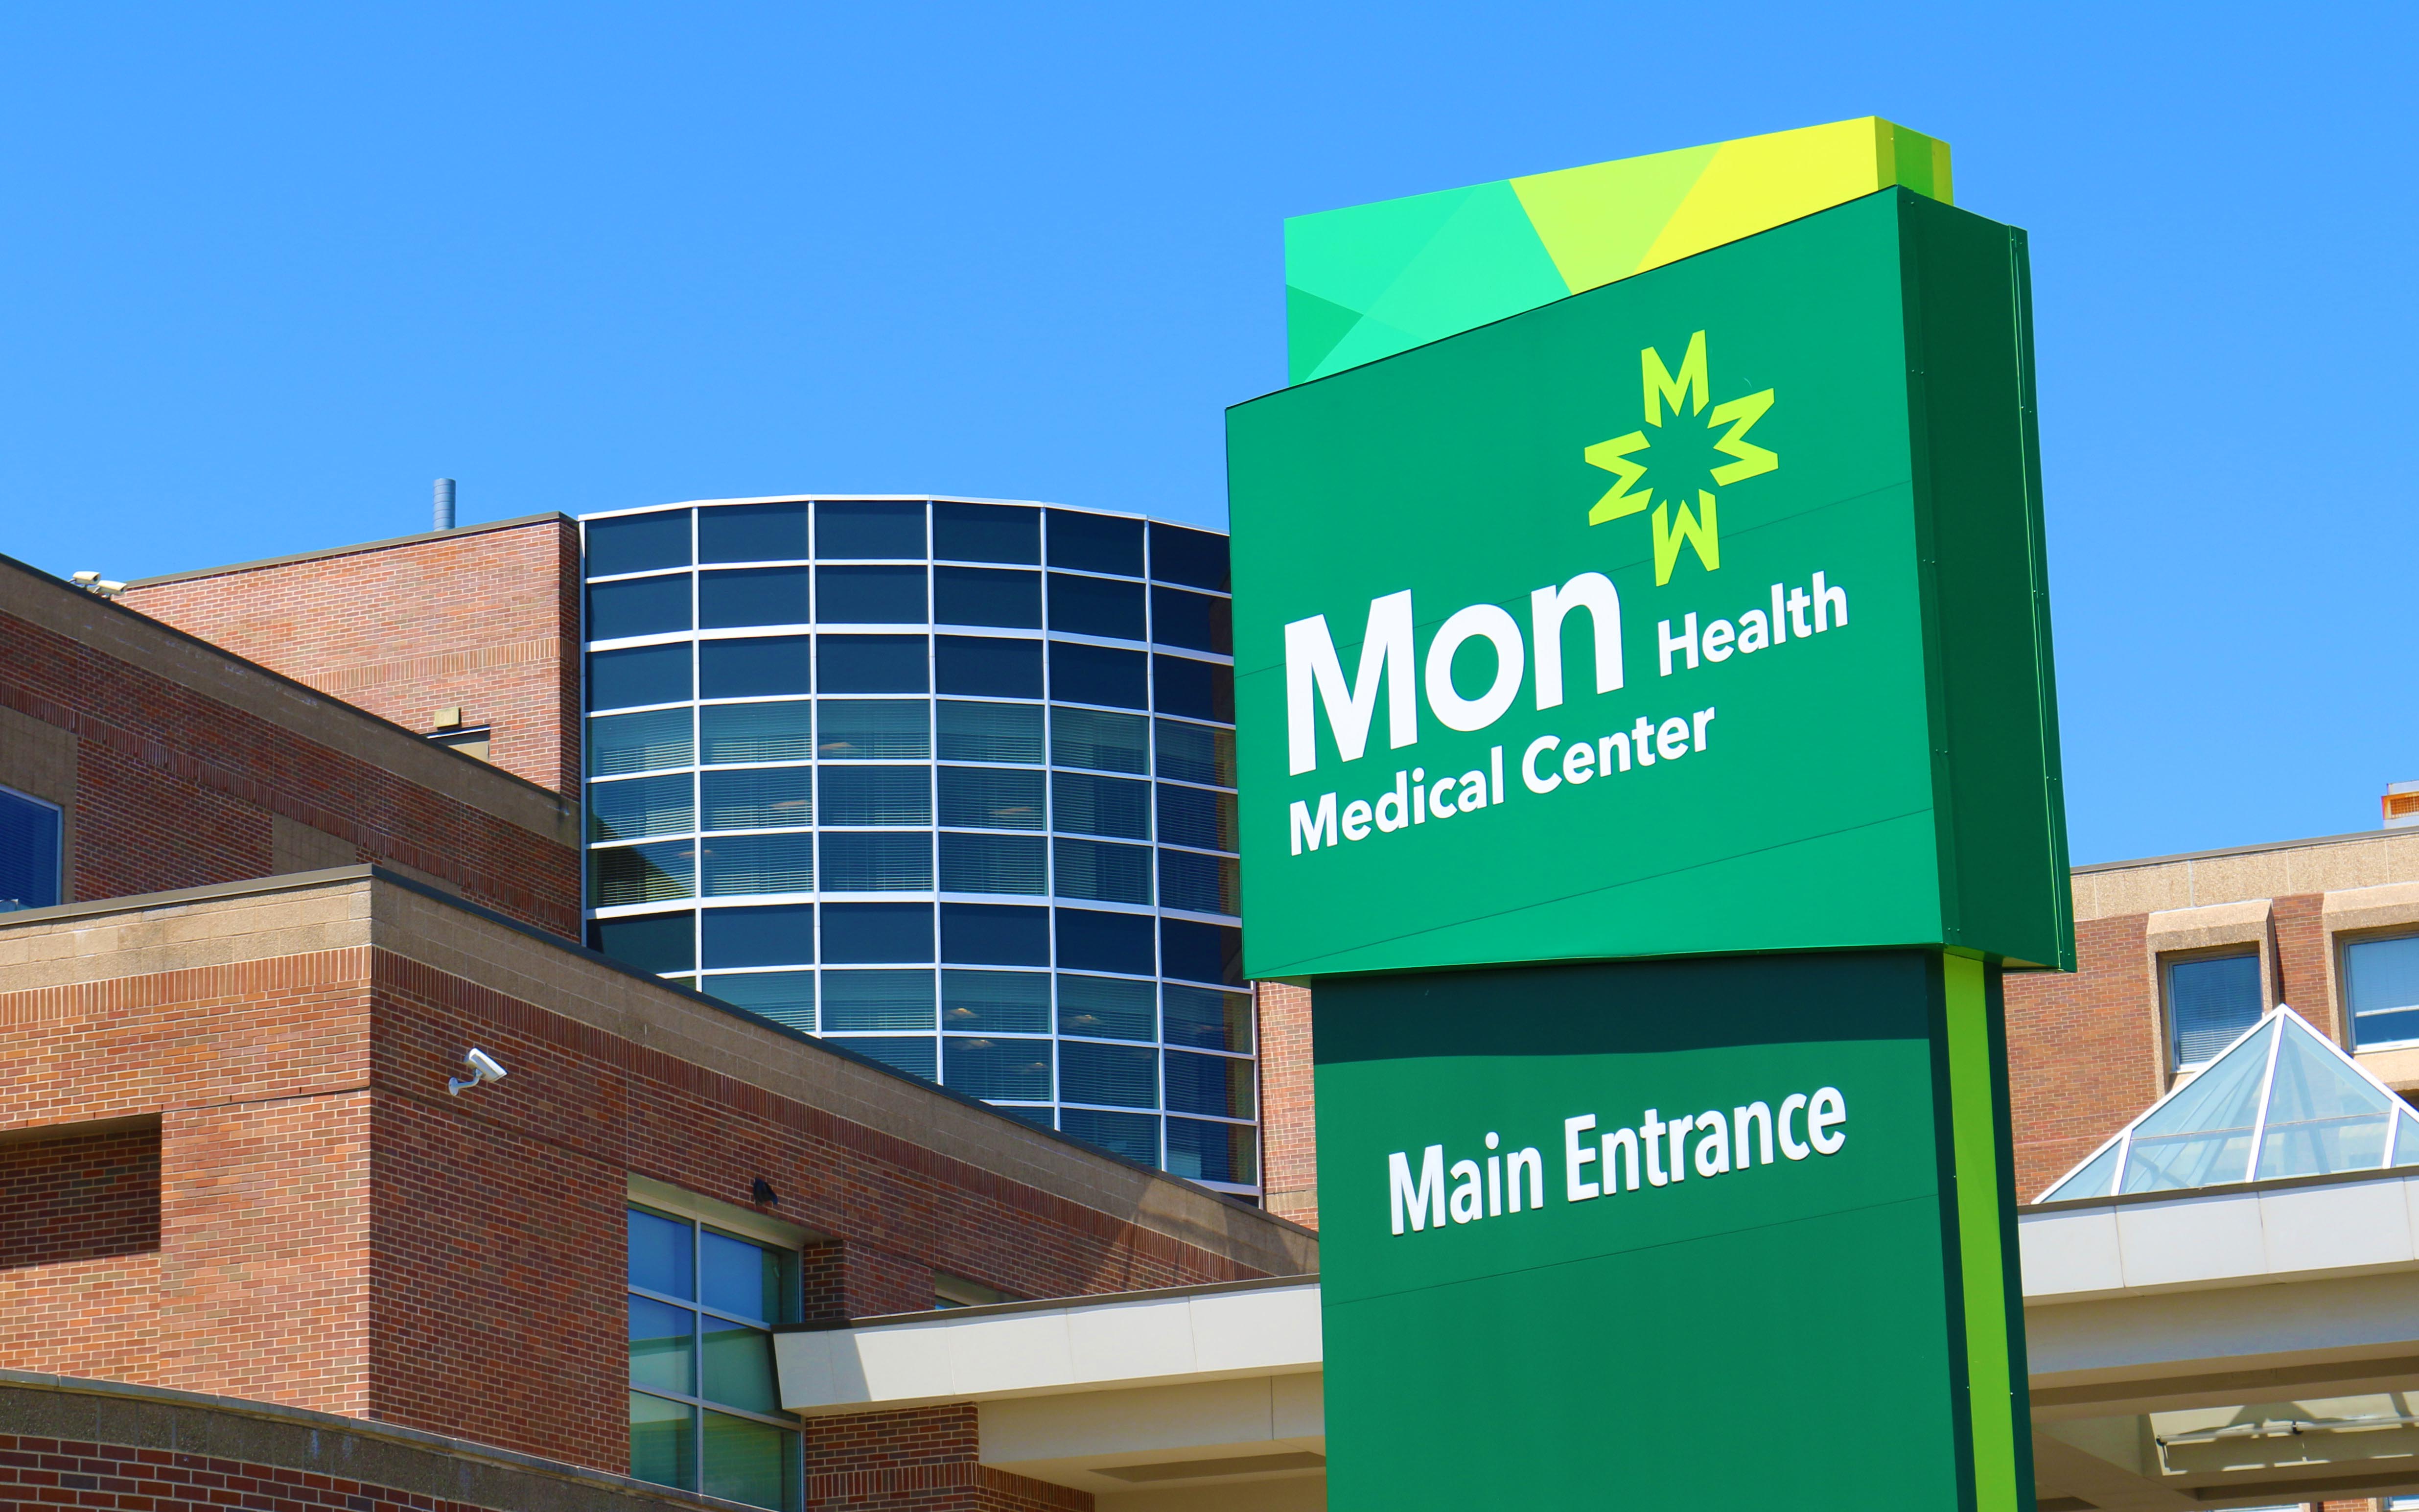 Mon Health Medical Center Receives Center of Excellence in Minimally Invasive Gynecology